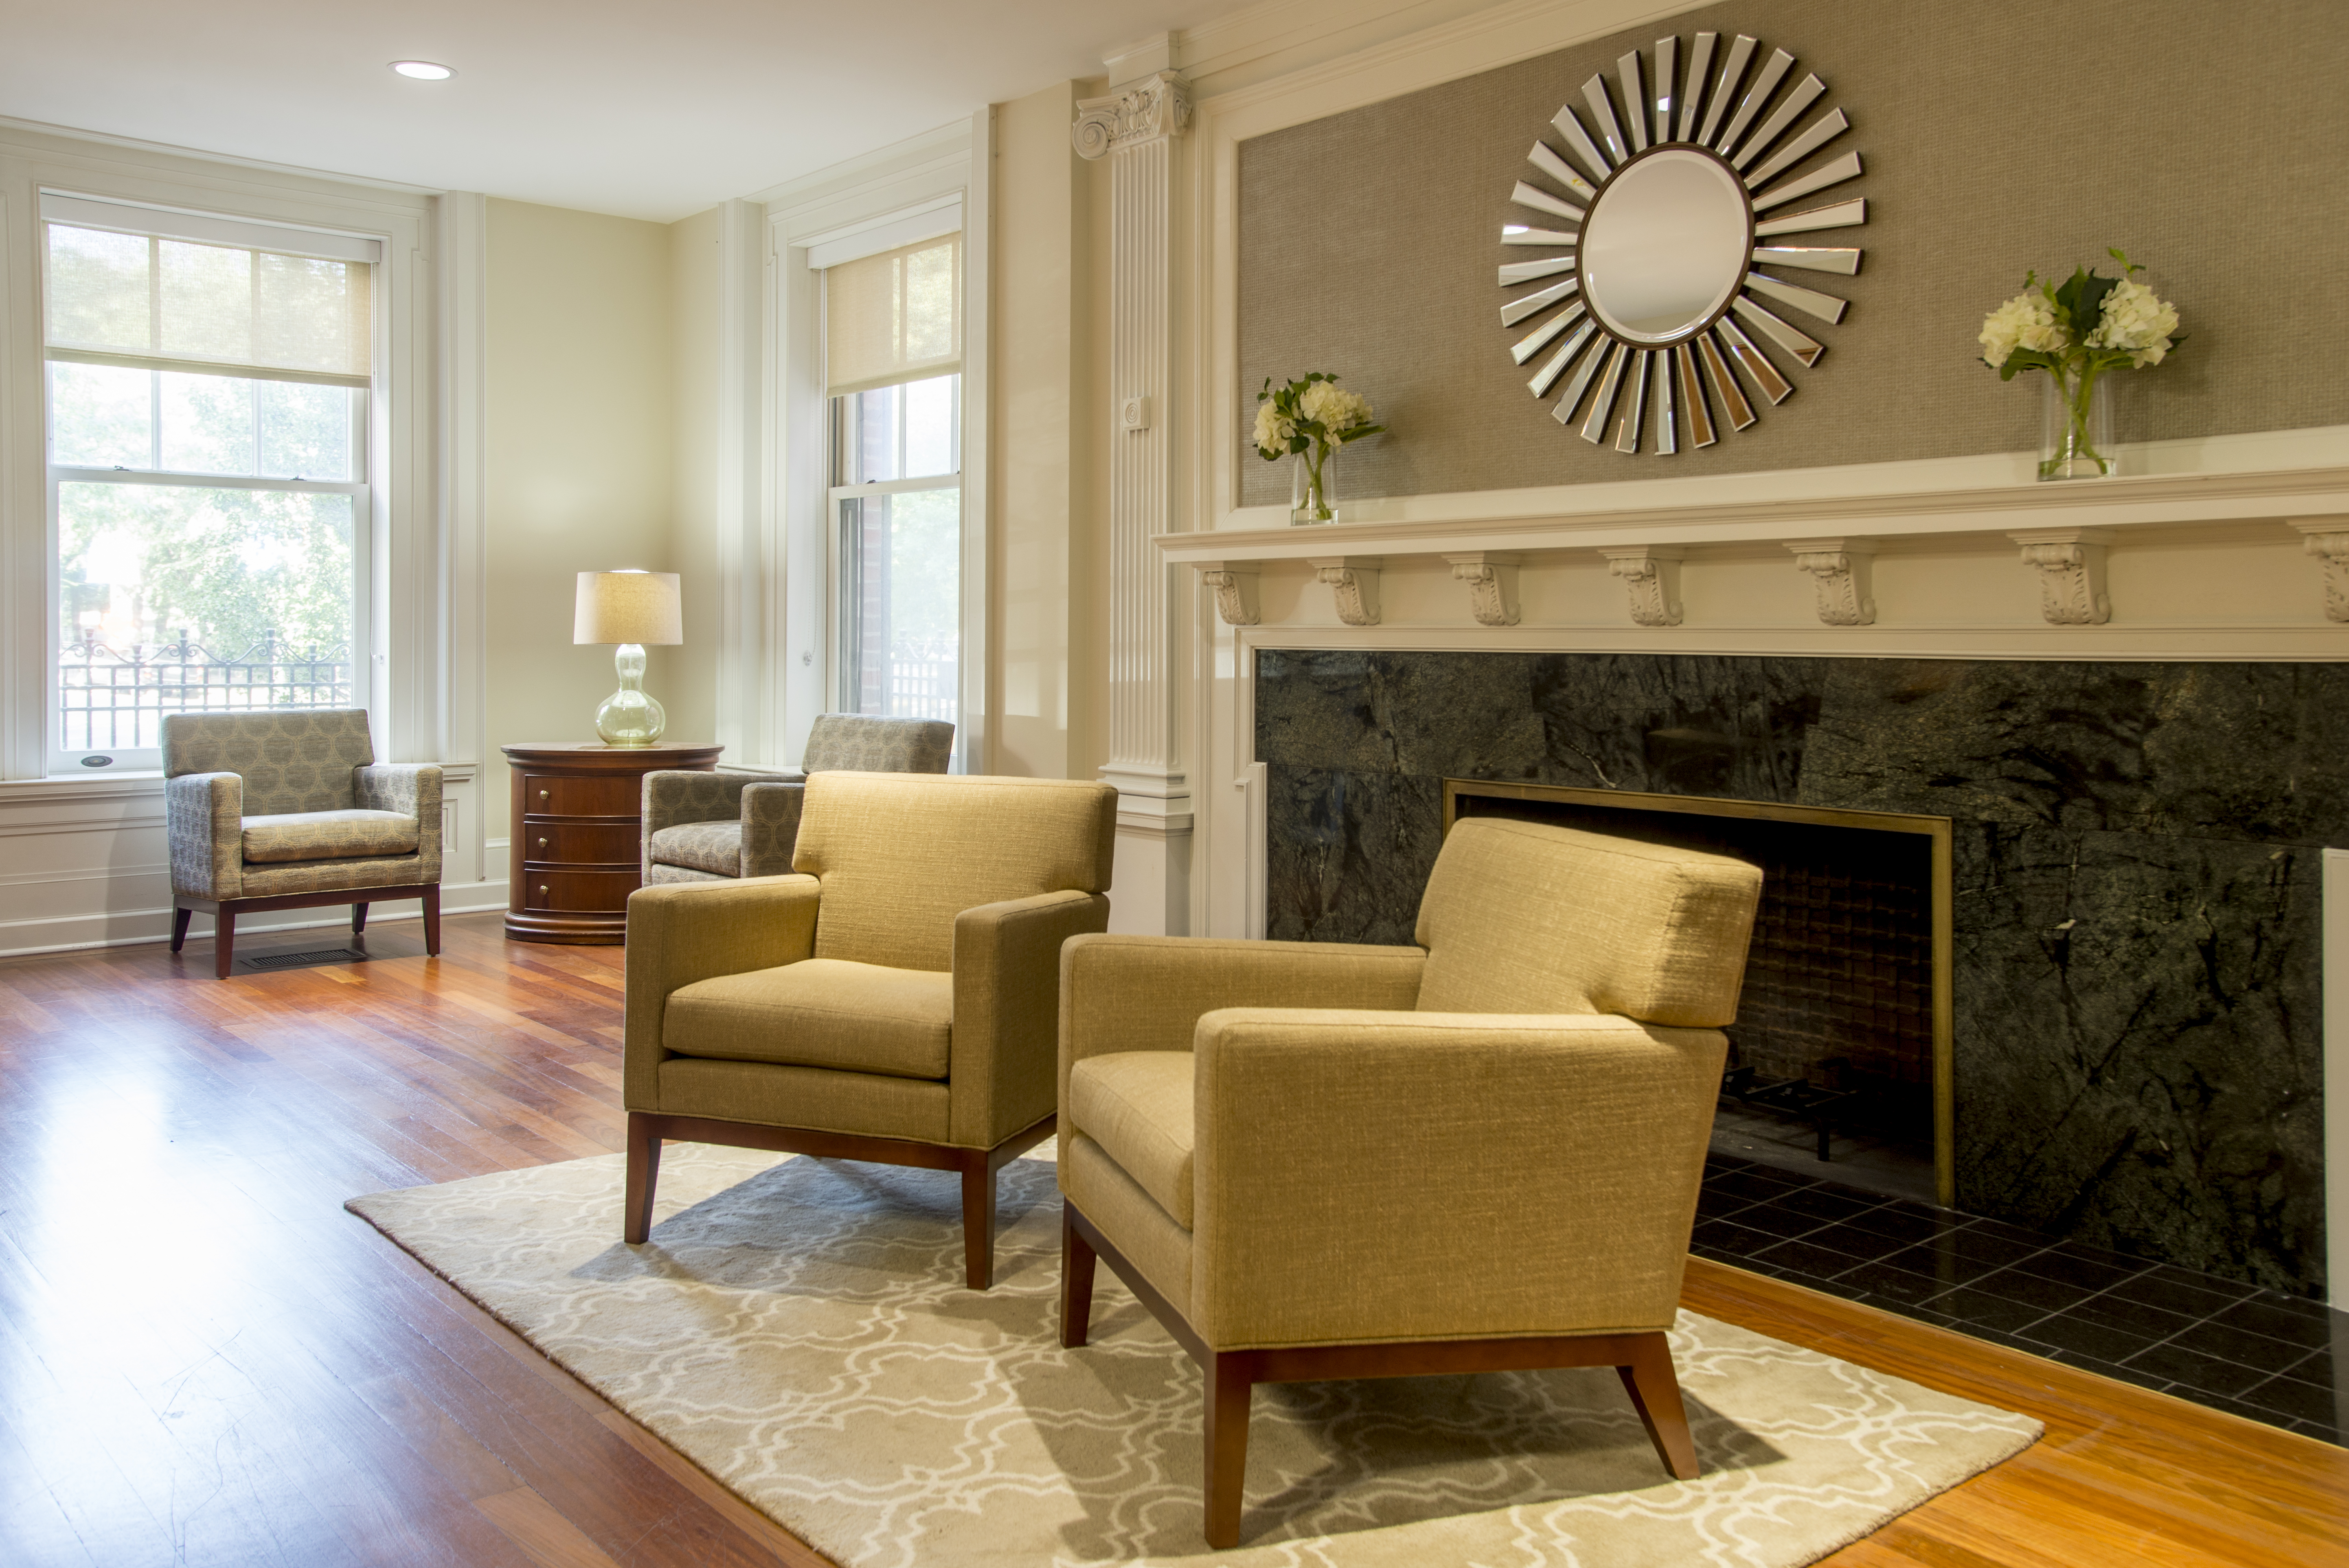 Inside the Hazelden Betty Ford center in Chicago featuring a fireplace and comfortable chairs